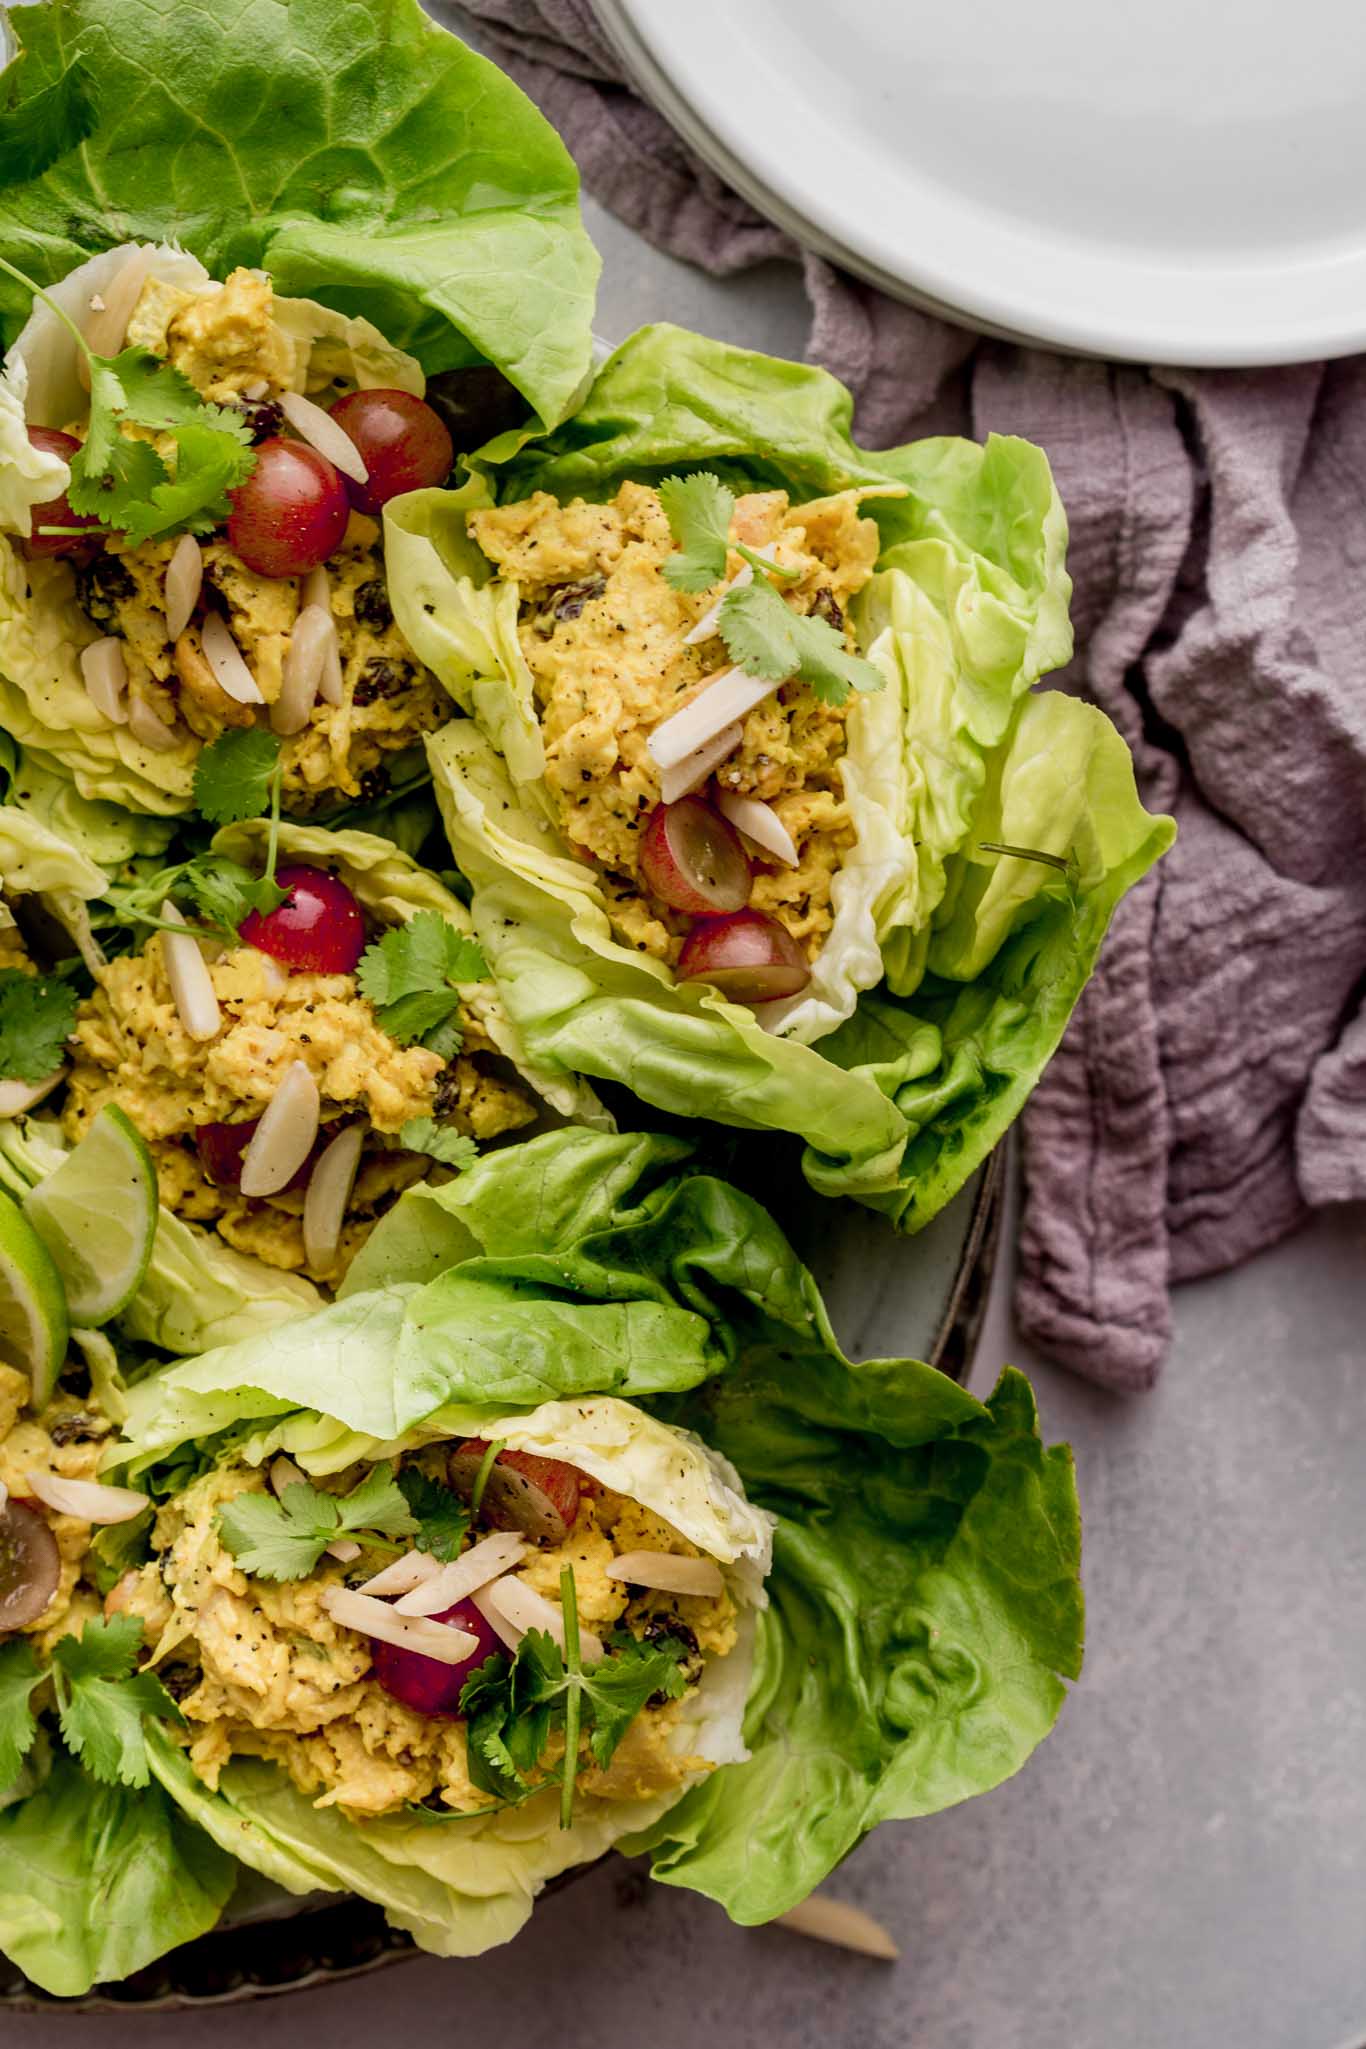 Curry Chicken Salad Lettuce Wraps can be assembled in just 5-minutes and with 4-ingredients, making them the perfect solution for busy weeknight dinners or meal prep. 